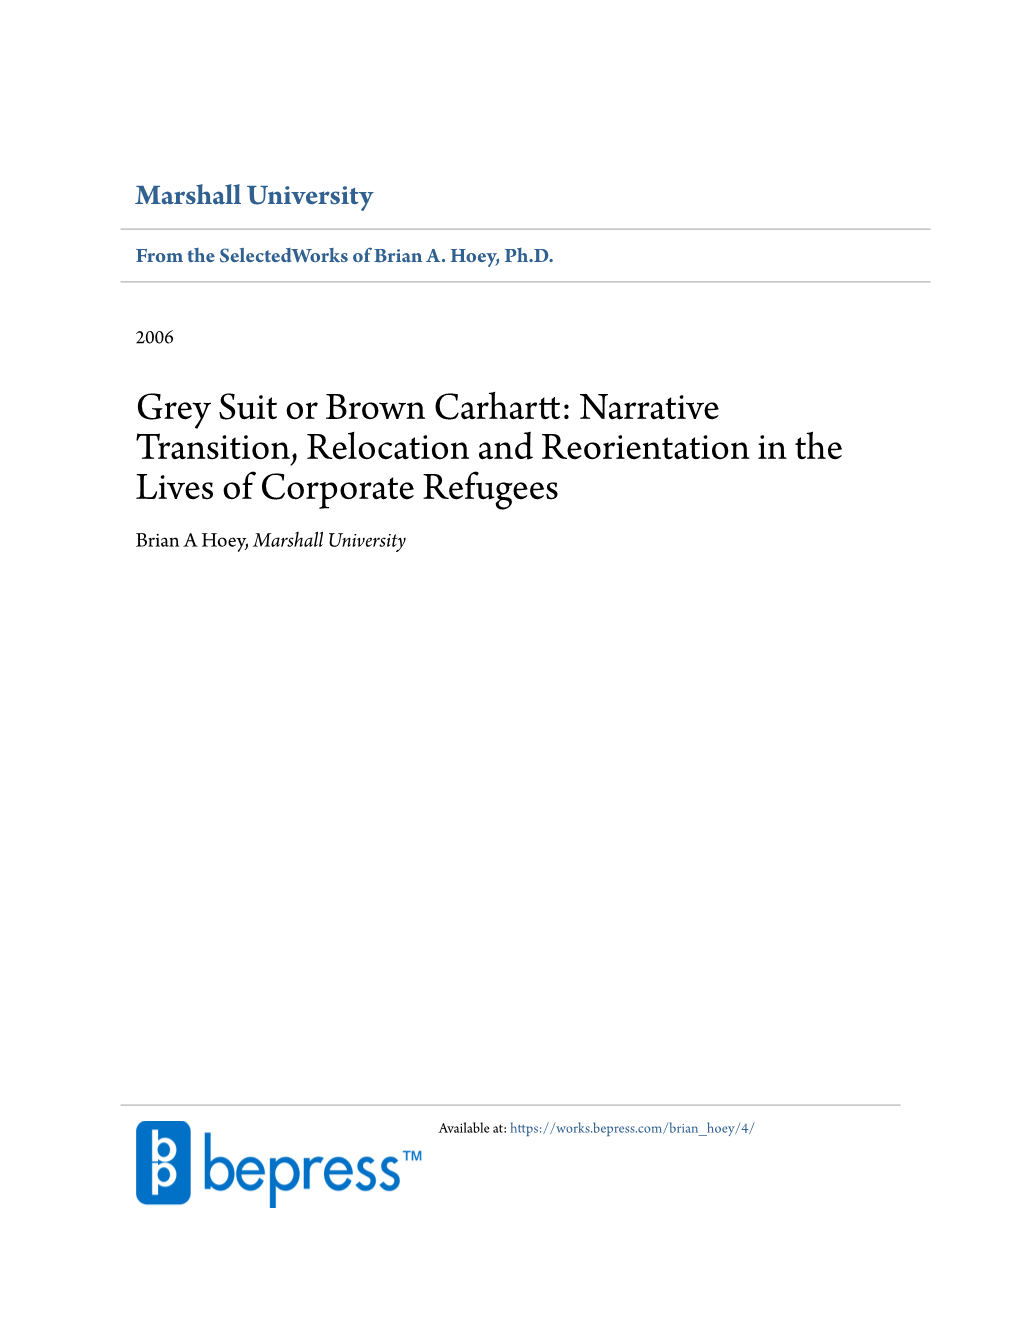 Grey Suit Or Brown Carhartt: Narrative Transition, Relocation and Reorientation in the Lives of Corporate Refugees Brian a Hoey, Marshall University